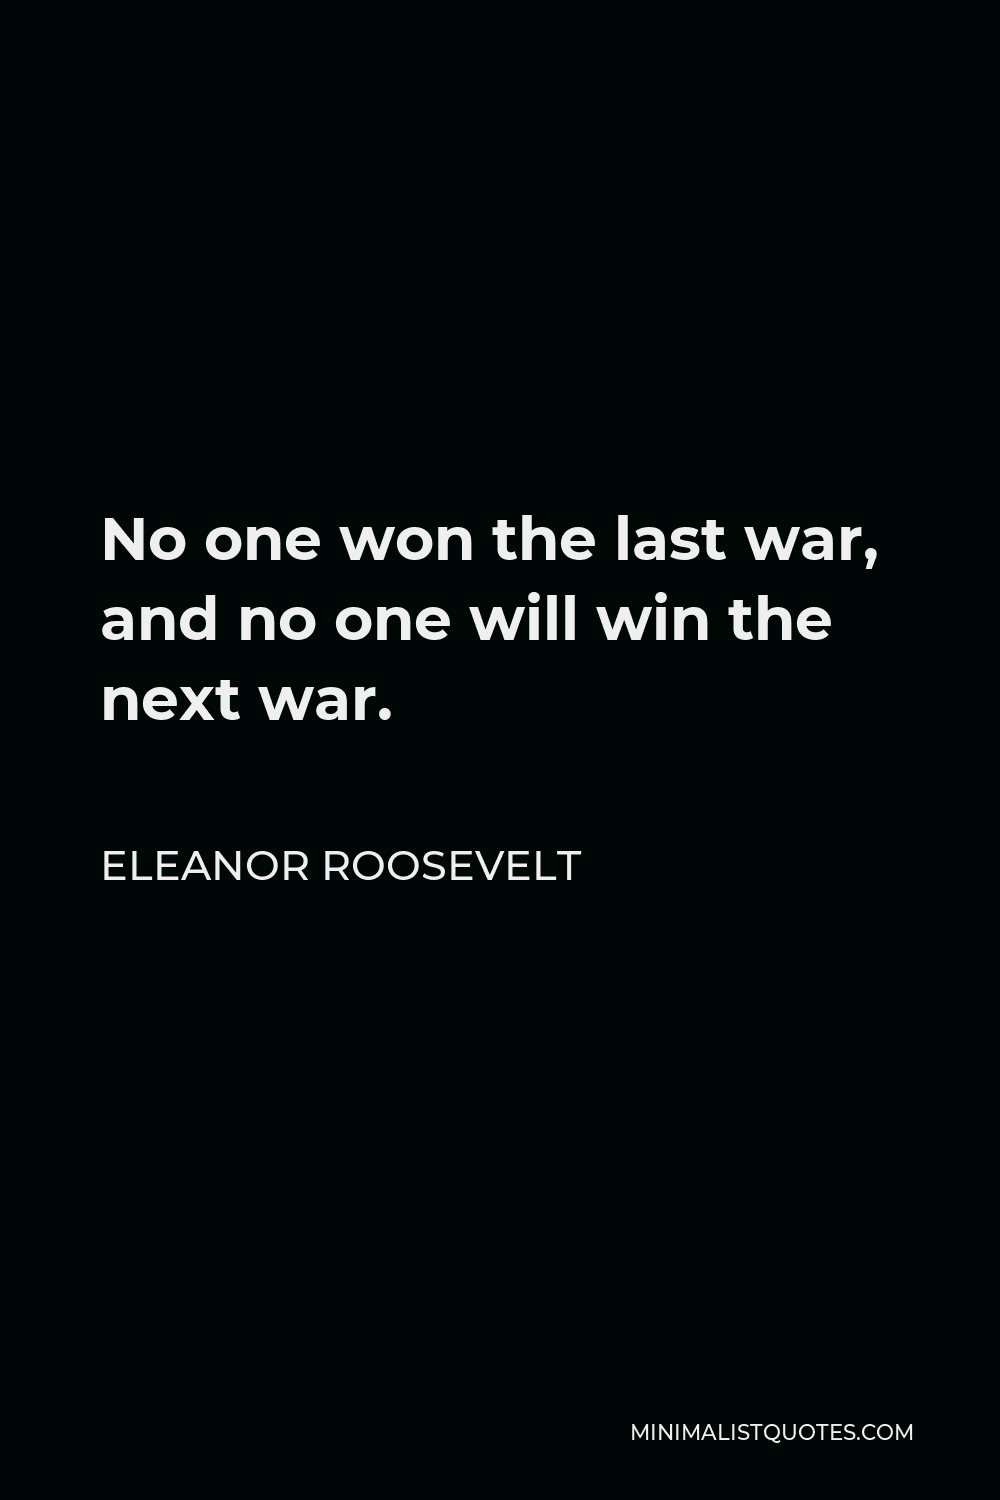 eleanor-roosevelt-quote-no-one-won-the-last-war-and-no-one-will-win